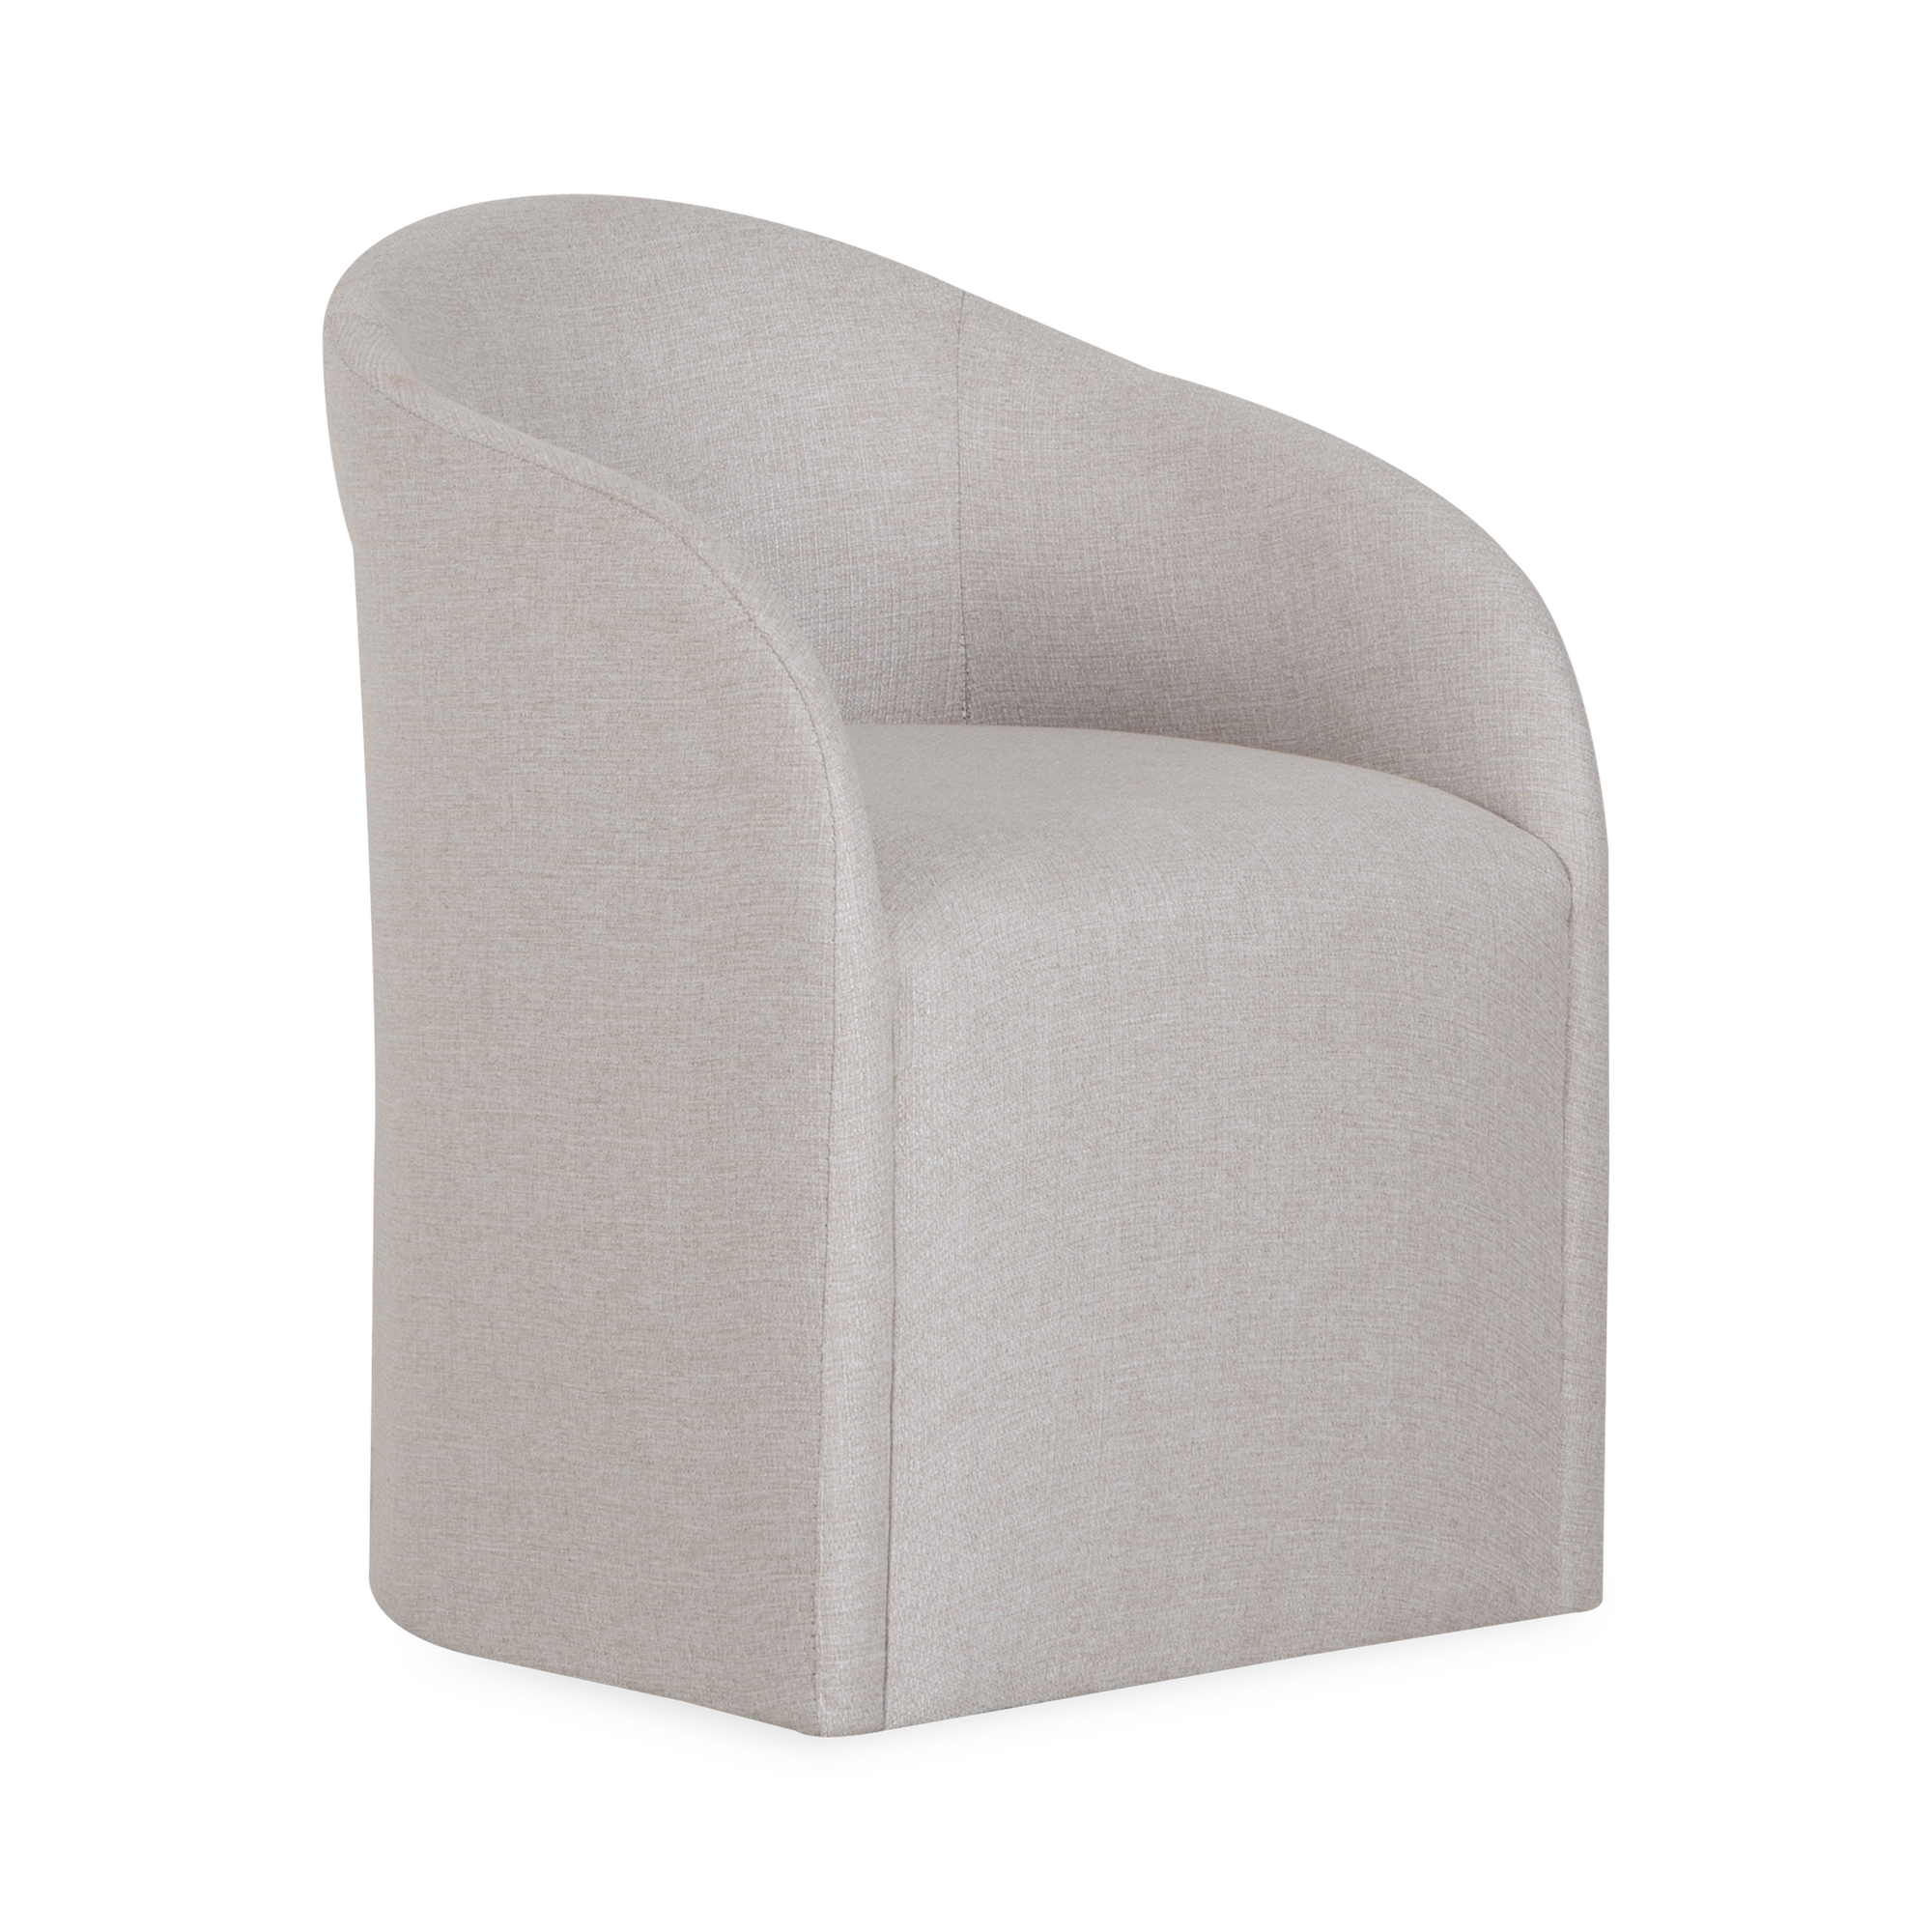 Cool modern minimalism informs the simple, elegant shape of the Grant dining arm chair.